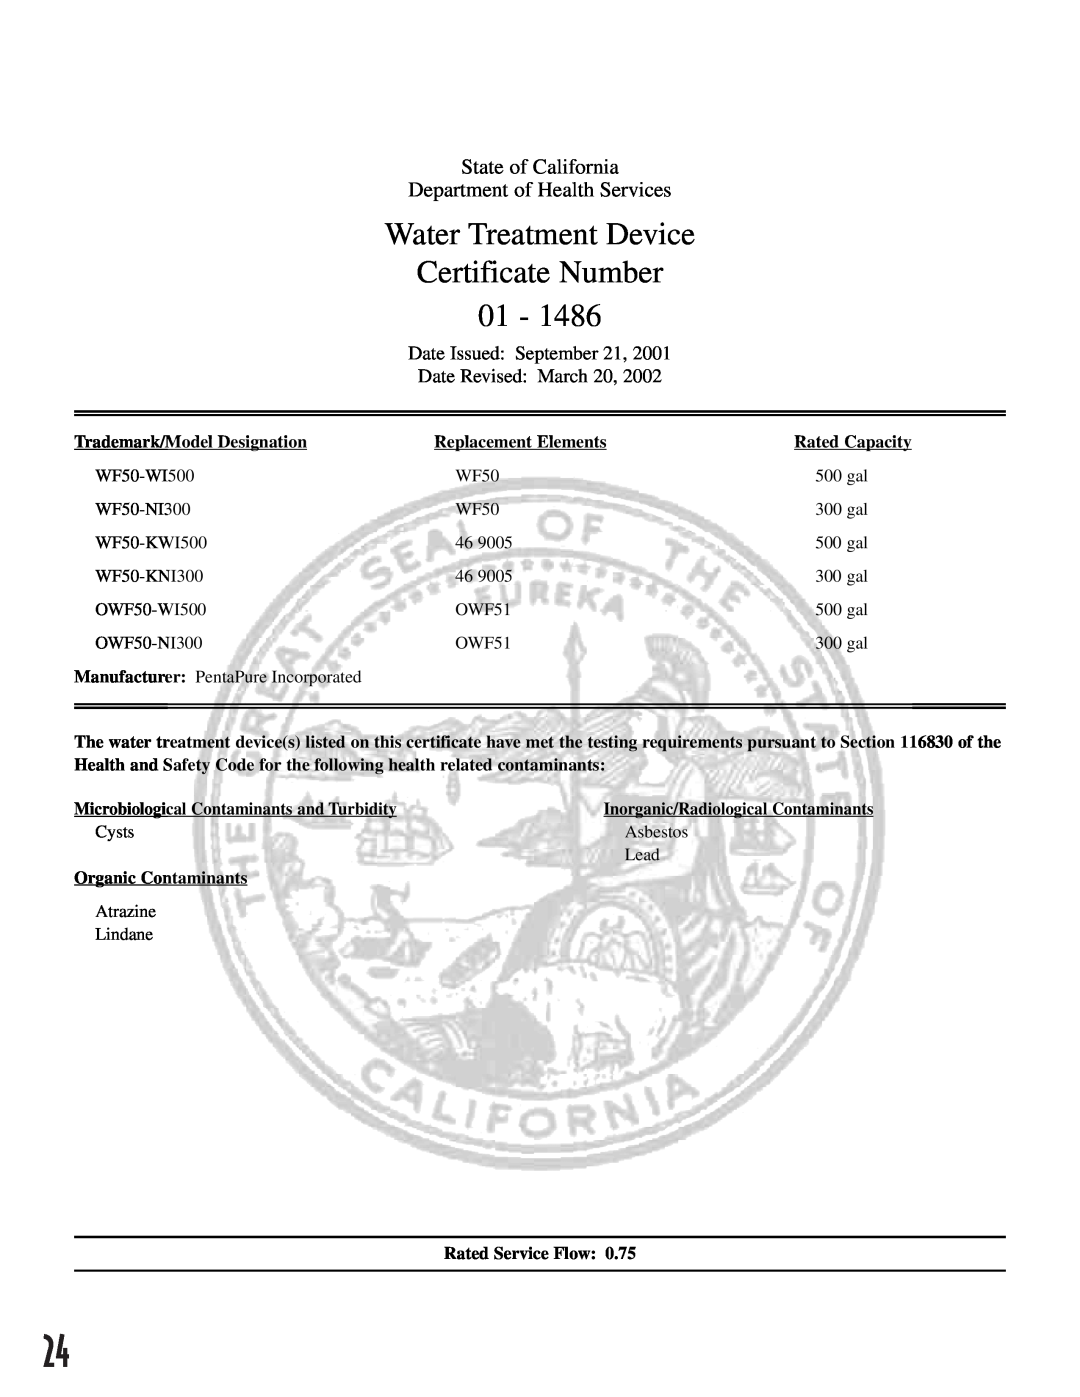 Maytag ARB2557CB Water Treatment Device Certificate Number 01, State of California Department of Health Services 